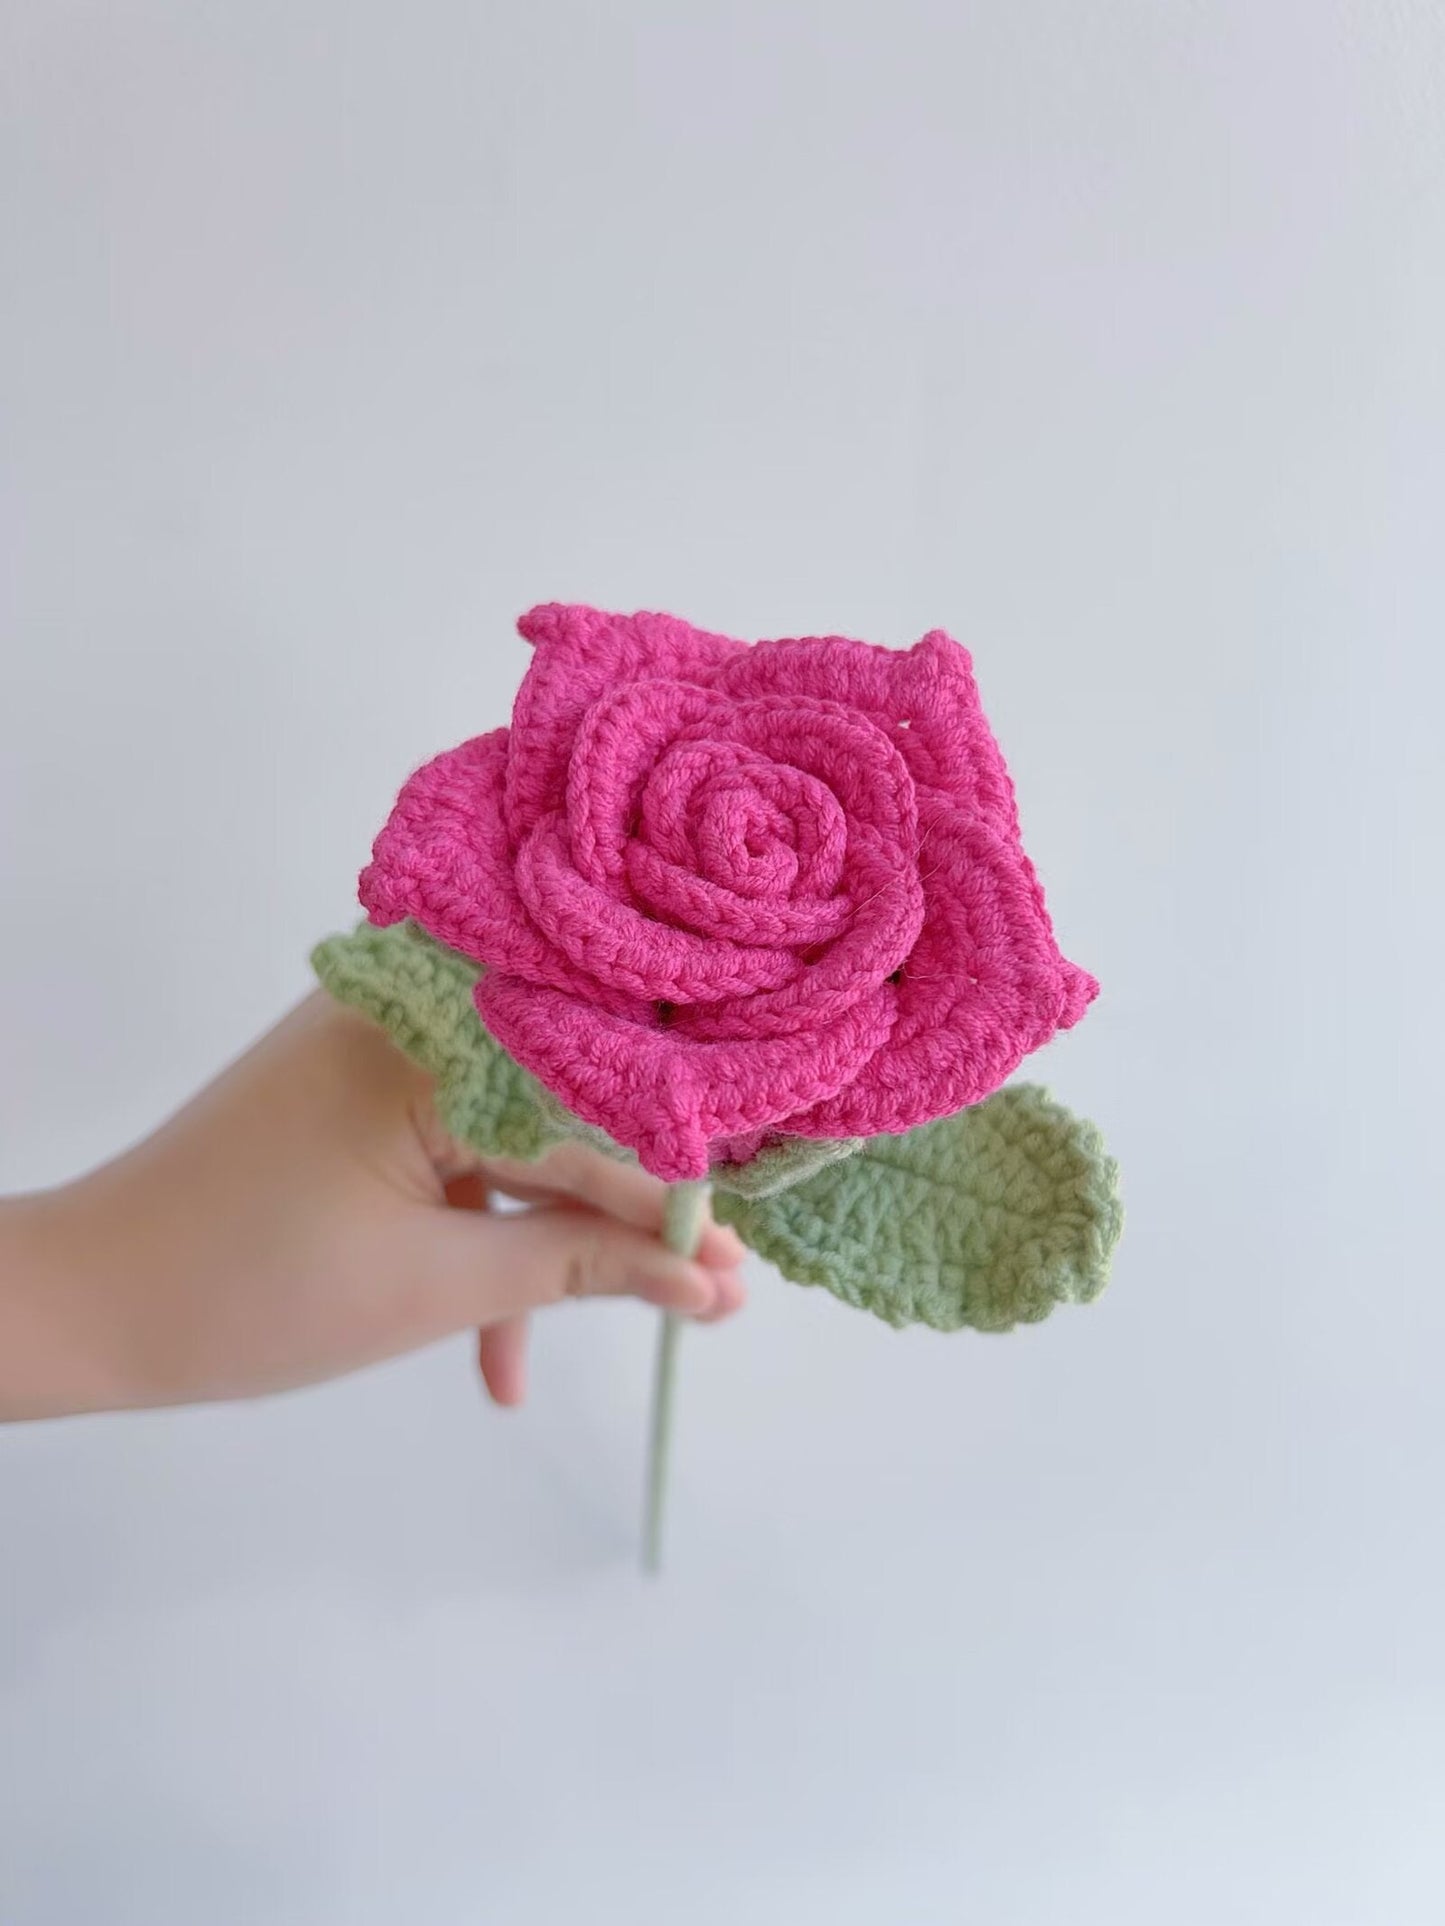 （4 in 1）Crochet roses patterns package (US terms) , lilyrosy